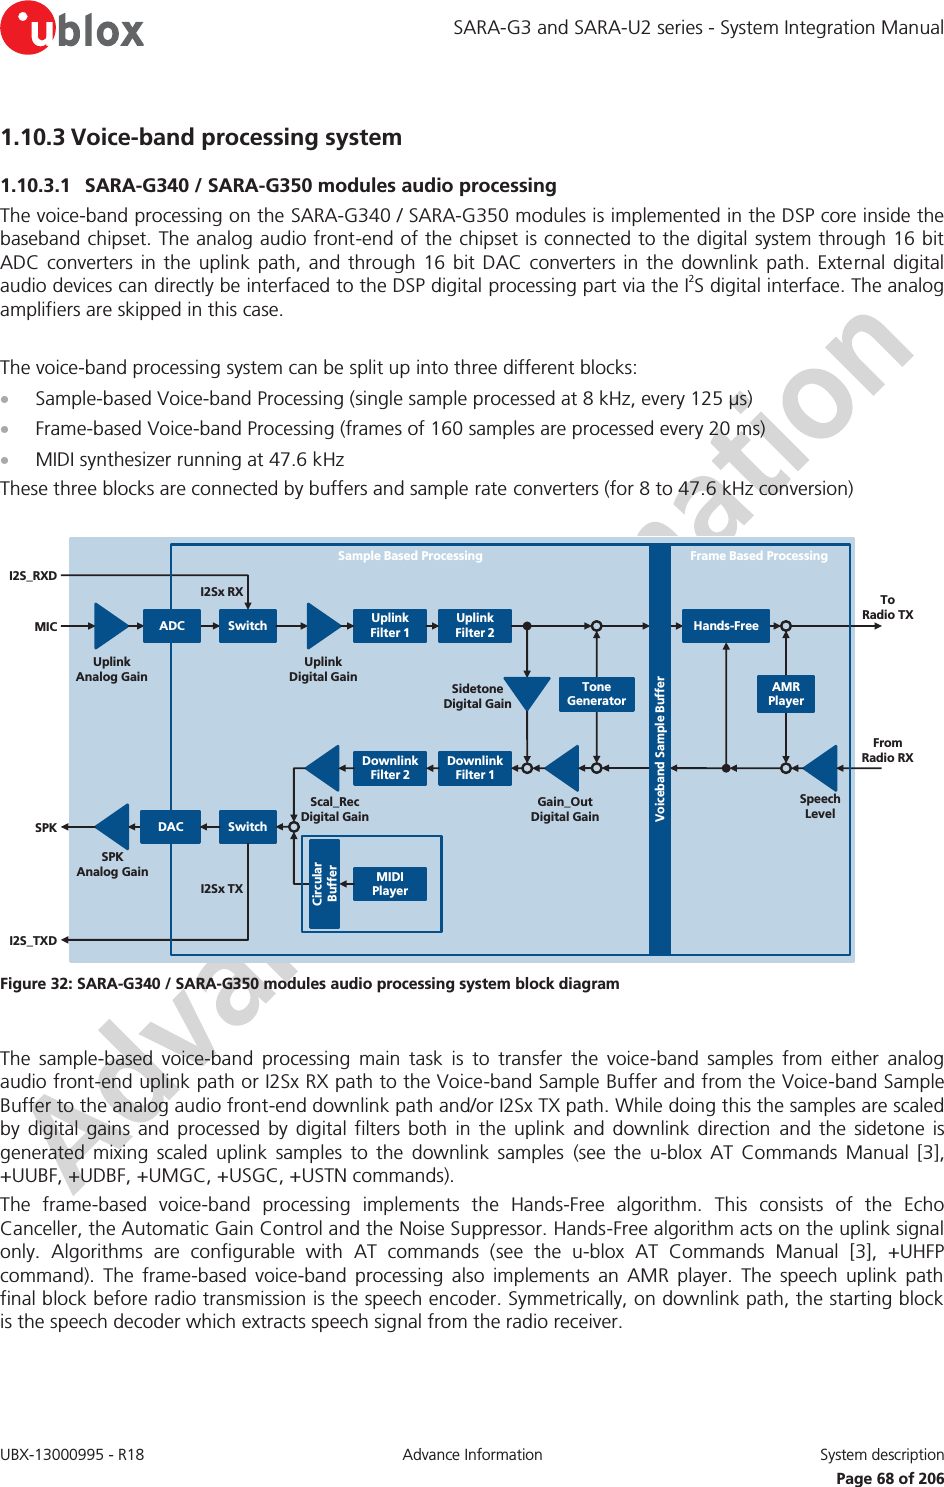 SARA-G3 and SARA-U2 series - System Integration Manual UBX-13000995 - R18  Advance Information  System description   Page 68 of 206 1.10.3 Voice-band processing system  1.10.3.1 SARA-G340 / SARA-G350 modules audio processing The voice-band processing on the SARA-G340 / SARA-G350 modules is implemented in the DSP core inside the baseband chipset. The analog audio front-end of the chipset is connected to the digital system through 16 bit ADC converters in the uplink path, and through 16 bit DAC converters in the downlink path. External digital audio devices can directly be interfaced to the DSP digital processing part via the I2S digital interface. The analog amplifiers are skipped in this case.  The voice-band processing system can be split up into three different blocks: x Sample-based Voice-band Processing (single sample processed at 8 kHz, every 125 μs) x Frame-based Voice-band Processing (frames of 160 samples are processed every 20 ms) x MIDI synthesizer running at 47.6 kHz These three blocks are connected by buffers and sample rate converters (for 8 to 47.6 kHz conversion)  I2S_RXDSwitchMIC Uplink Analog GainUplink Filter 2Uplink Filter 1To    Radio TXUplinkDigital GainDownlink Filter 1Downlink Filter 2MIDI PlayerSPK SwitchI2Sx TXI2S_TXDScal_Rec Digital GainSPK         Analog GainGain_Out Digital GainFrom Radio RXSpeech LevelI2Sx RXSample Based Processing Frame Based ProcessingCircular BufferSidetone Digital GainDACADCTone GeneratorAMR PlayerHands-FreeVoiceband Sample Buffer Figure 32: SARA-G340 / SARA-G350 modules audio processing system block diagram  The sample-based voice-band processing main task is to transfer the voice-band samples from either analog audio front-end uplink path or I2Sx RX path to the Voice-band Sample Buffer and from the Voice-band Sample Buffer to the analog audio front-end downlink path and/or I2Sx TX path. While doing this the samples are scaled by digital gains and processed by digital filters both in the uplink and downlink direction and the sidetone is generated mixing scaled uplink samples to the downlink samples (see the u-blox AT Commands Manual [3], +UUBF, +UDBF, +UMGC, +USGC, +USTN commands). The frame-based voice-band processing implements the Hands-Free algorithm. This consists of the Echo Canceller, the Automatic Gain Control and the Noise Suppressor. Hands-Free algorithm acts on the uplink signal only. Algorithms are configurable with AT commands (see the u-blox AT Commands Manual [3], +UHFP command). The frame-based voice-band processing also implements an AMR player. The speech uplink path final block before radio transmission is the speech encoder. Symmetrically, on downlink path, the starting block is the speech decoder which extracts speech signal from the radio receiver. 